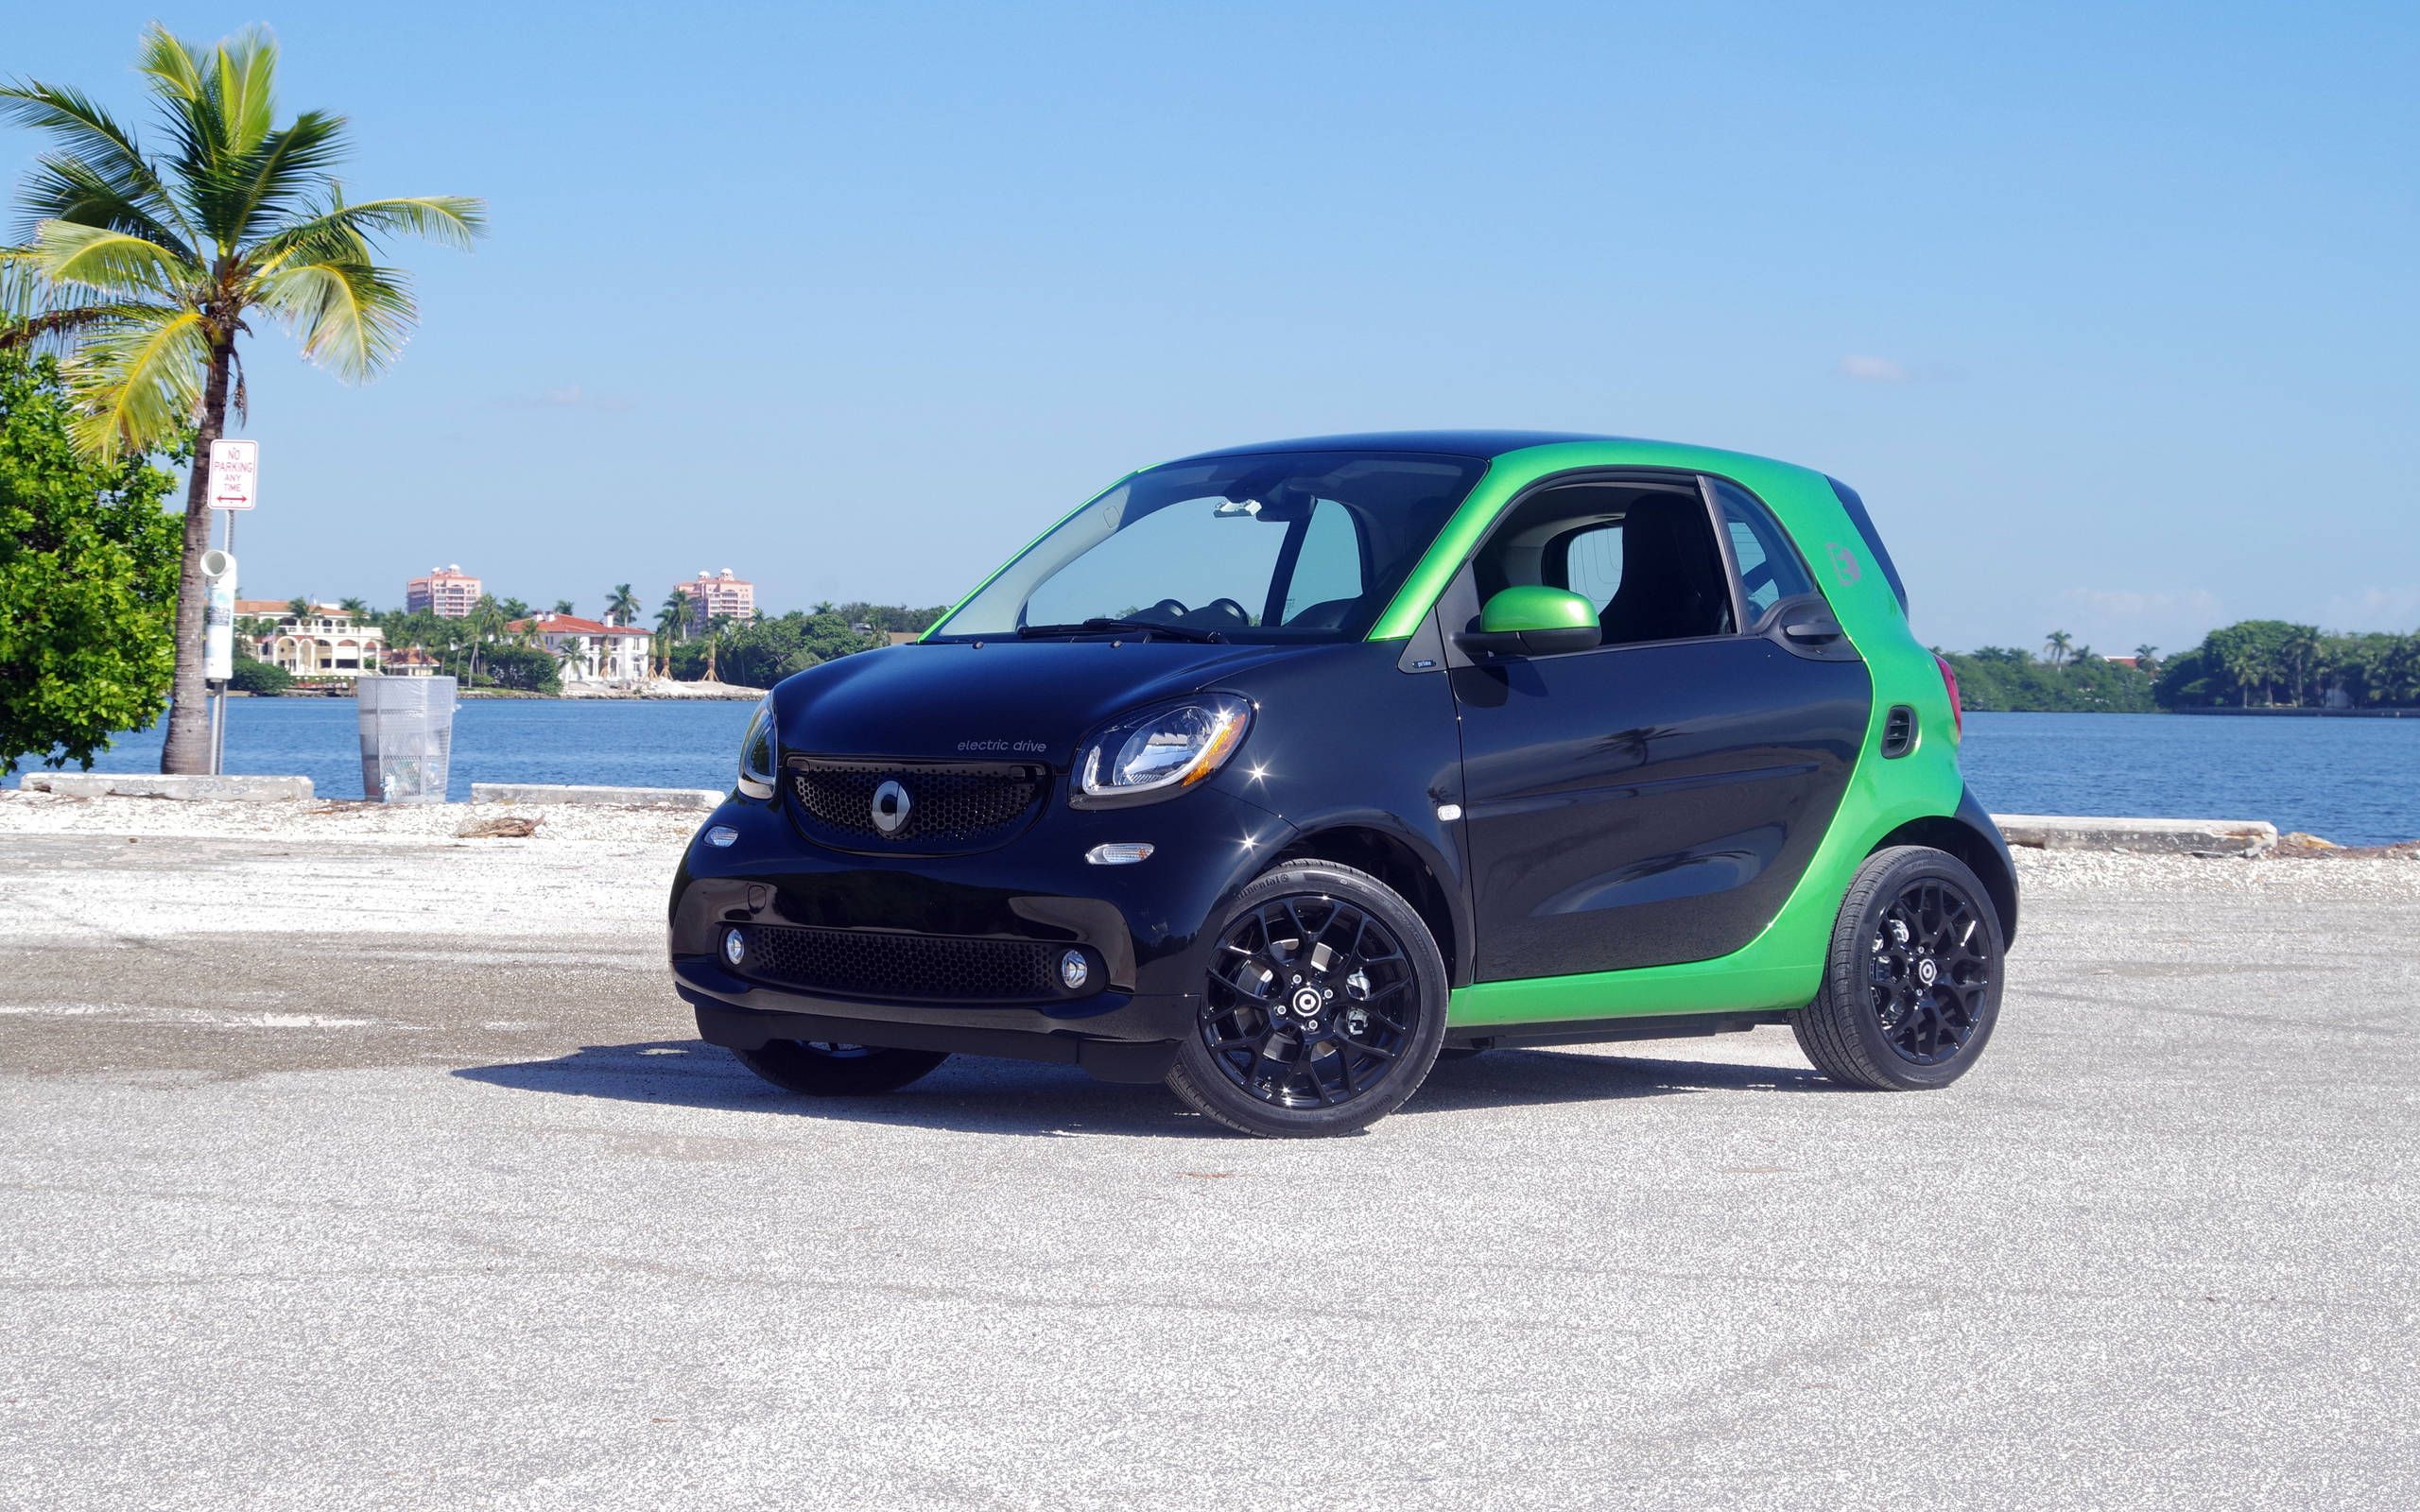 smart fortwo electric drive (2017)